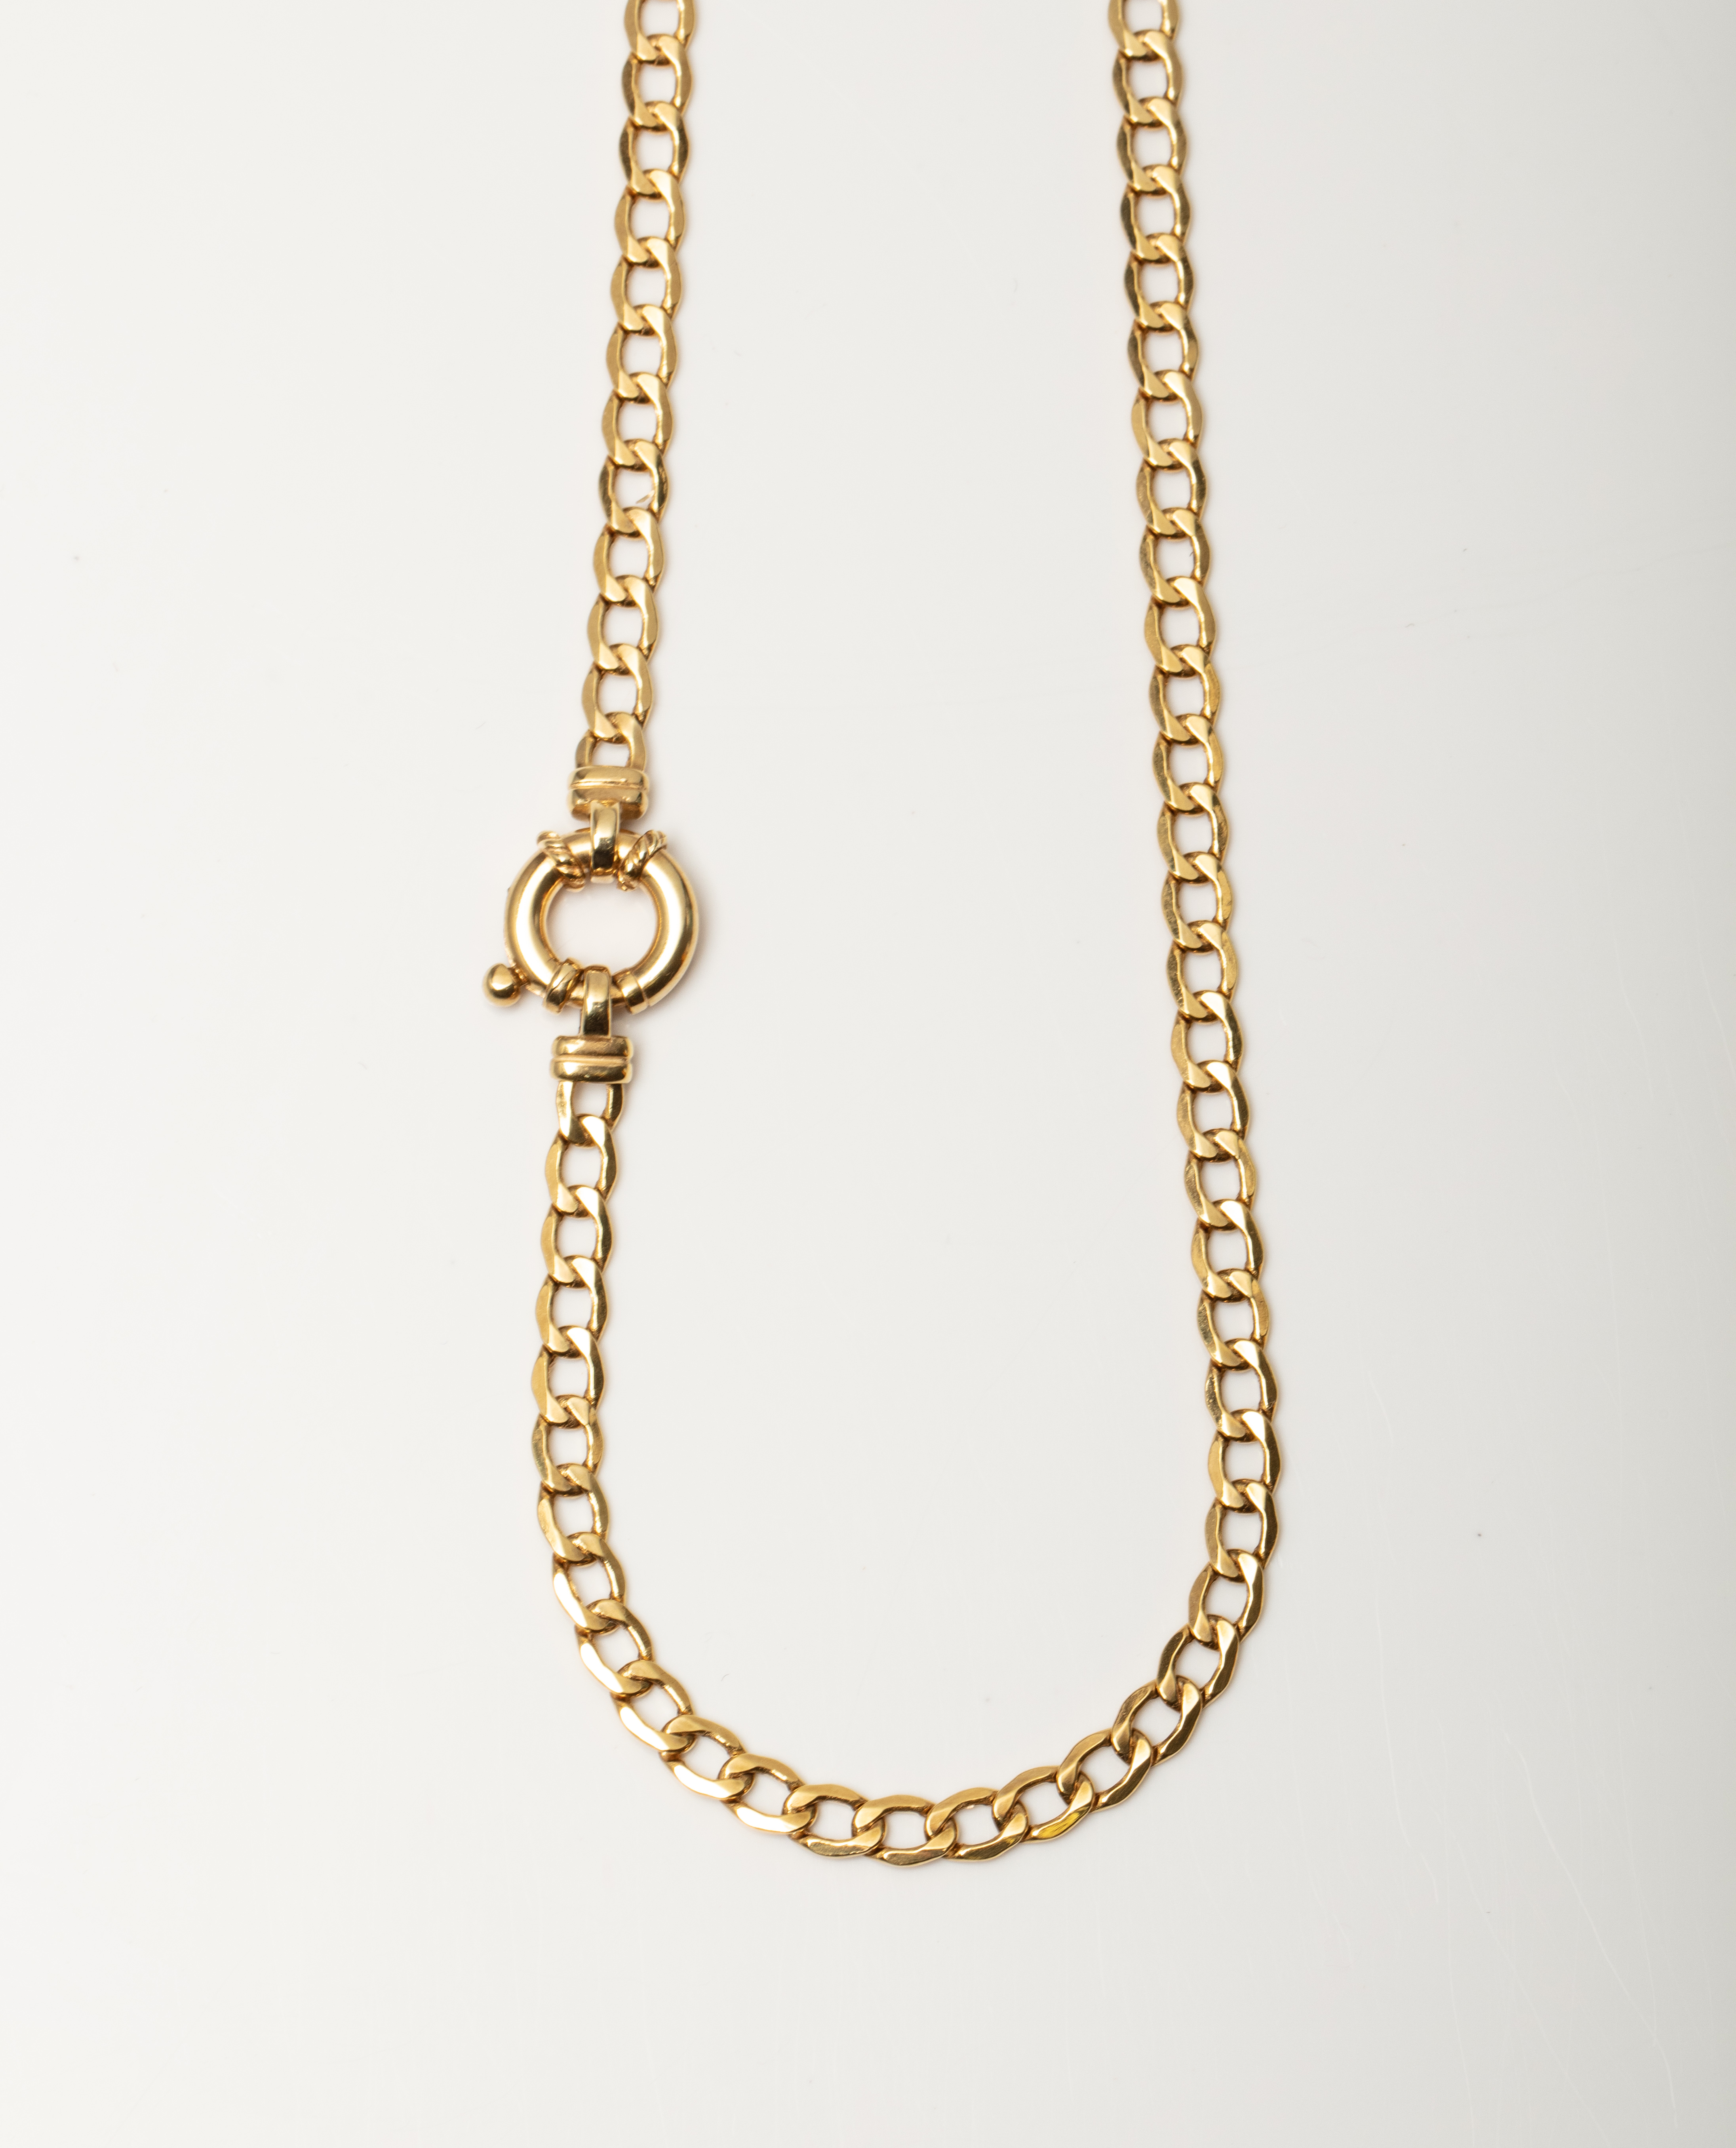 A 14CT GOLD CURB CHAIN WITH SIGNORETTI CLASP